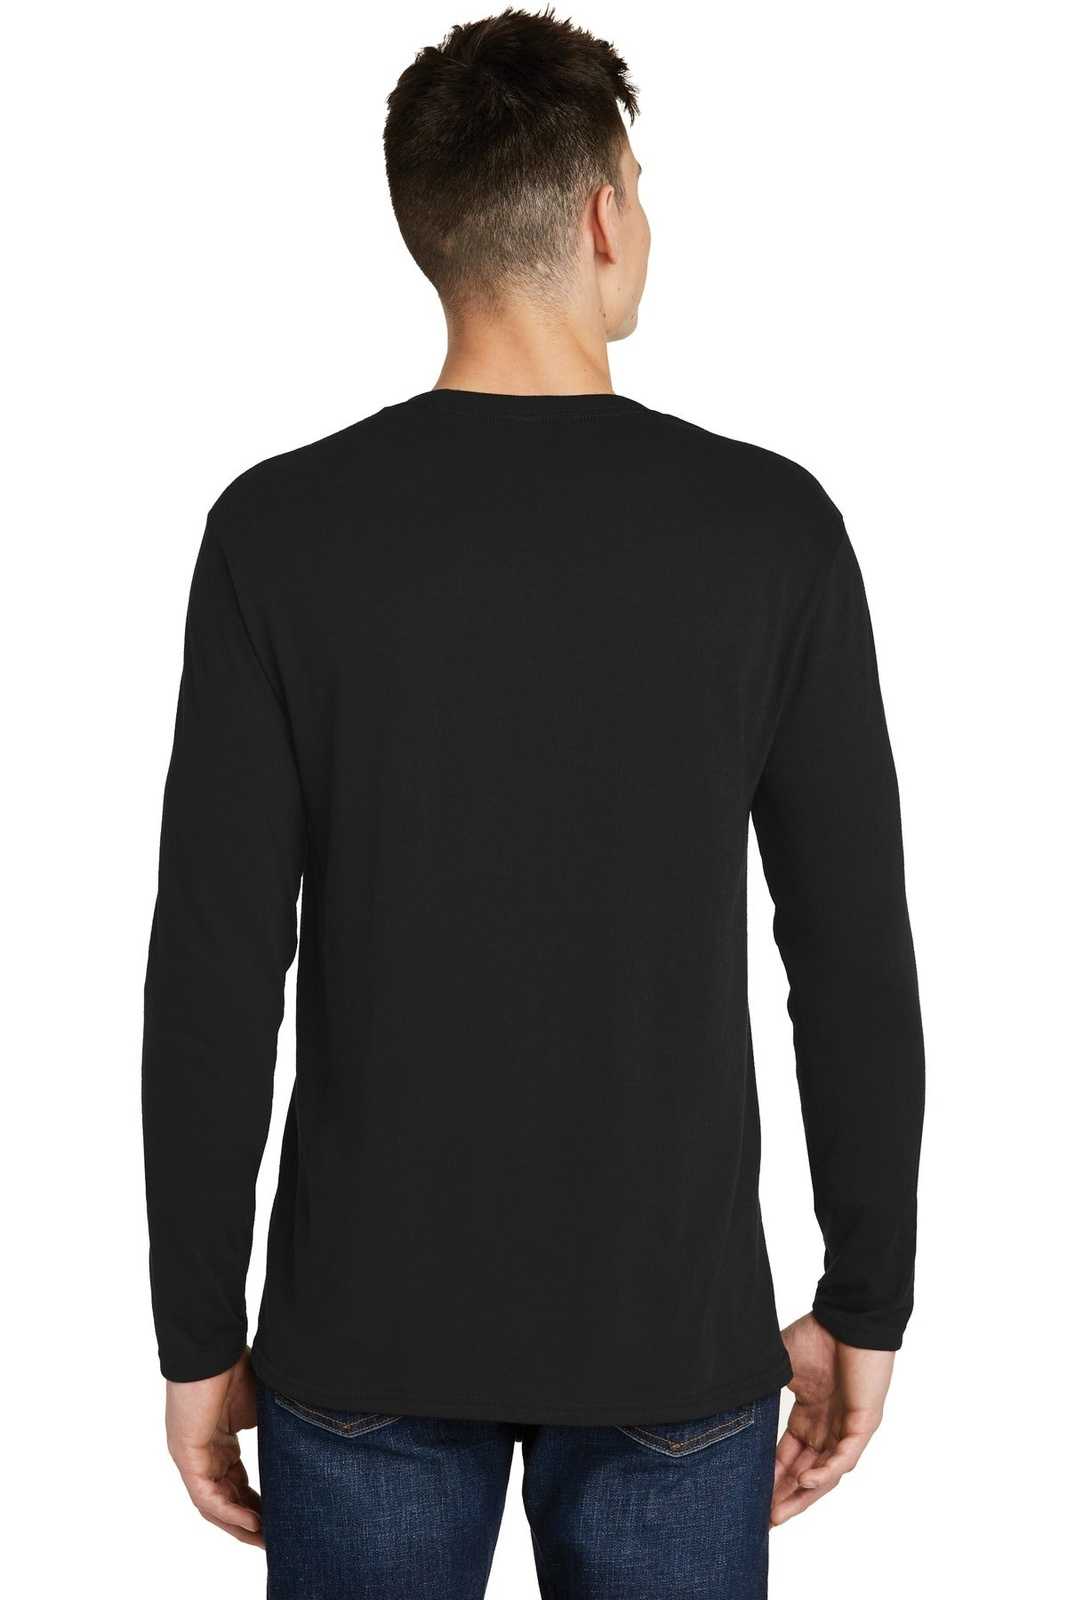 District DT6200 Very Important Tee Long Sleeve - Black - HIT a Double - 2